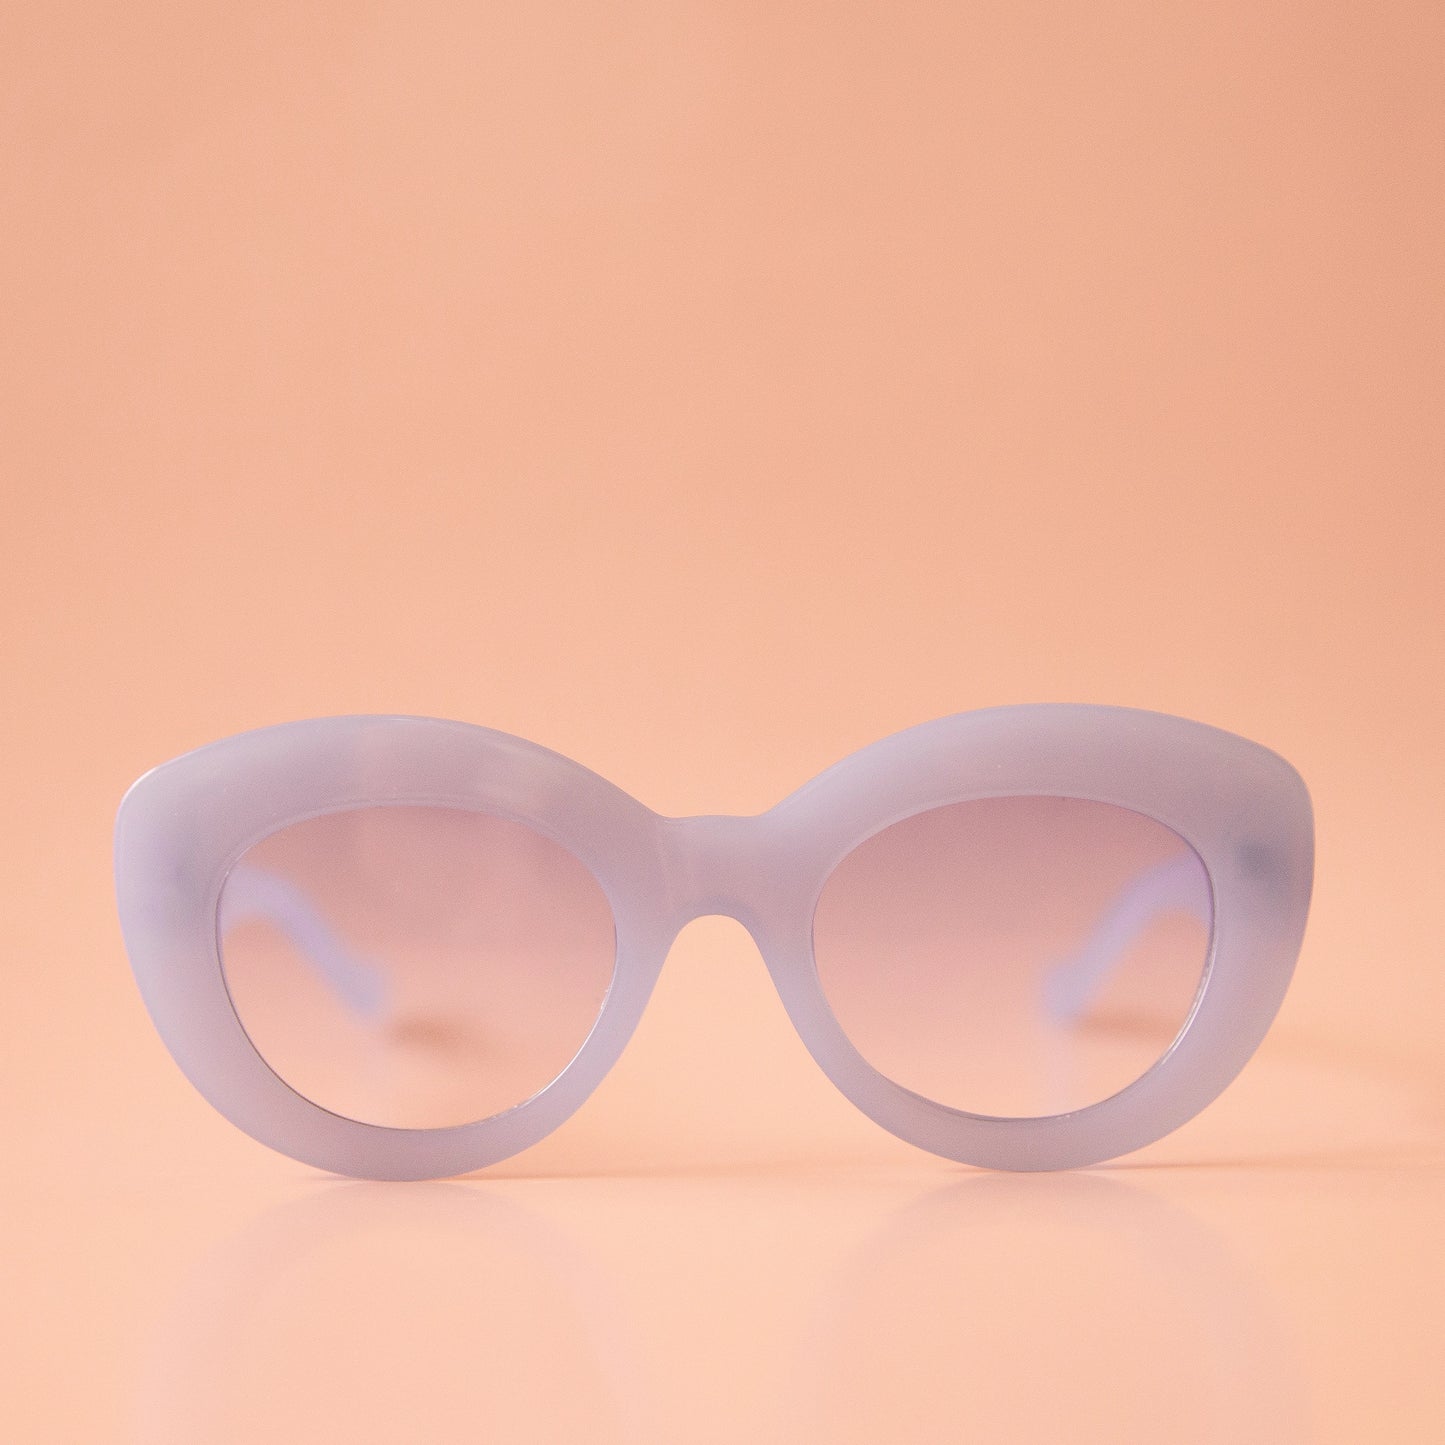 On a peachy background is a pair of light blue sunglasses with a rounded shape and a slight cat eye corner. The lenses are also a light blue shade.